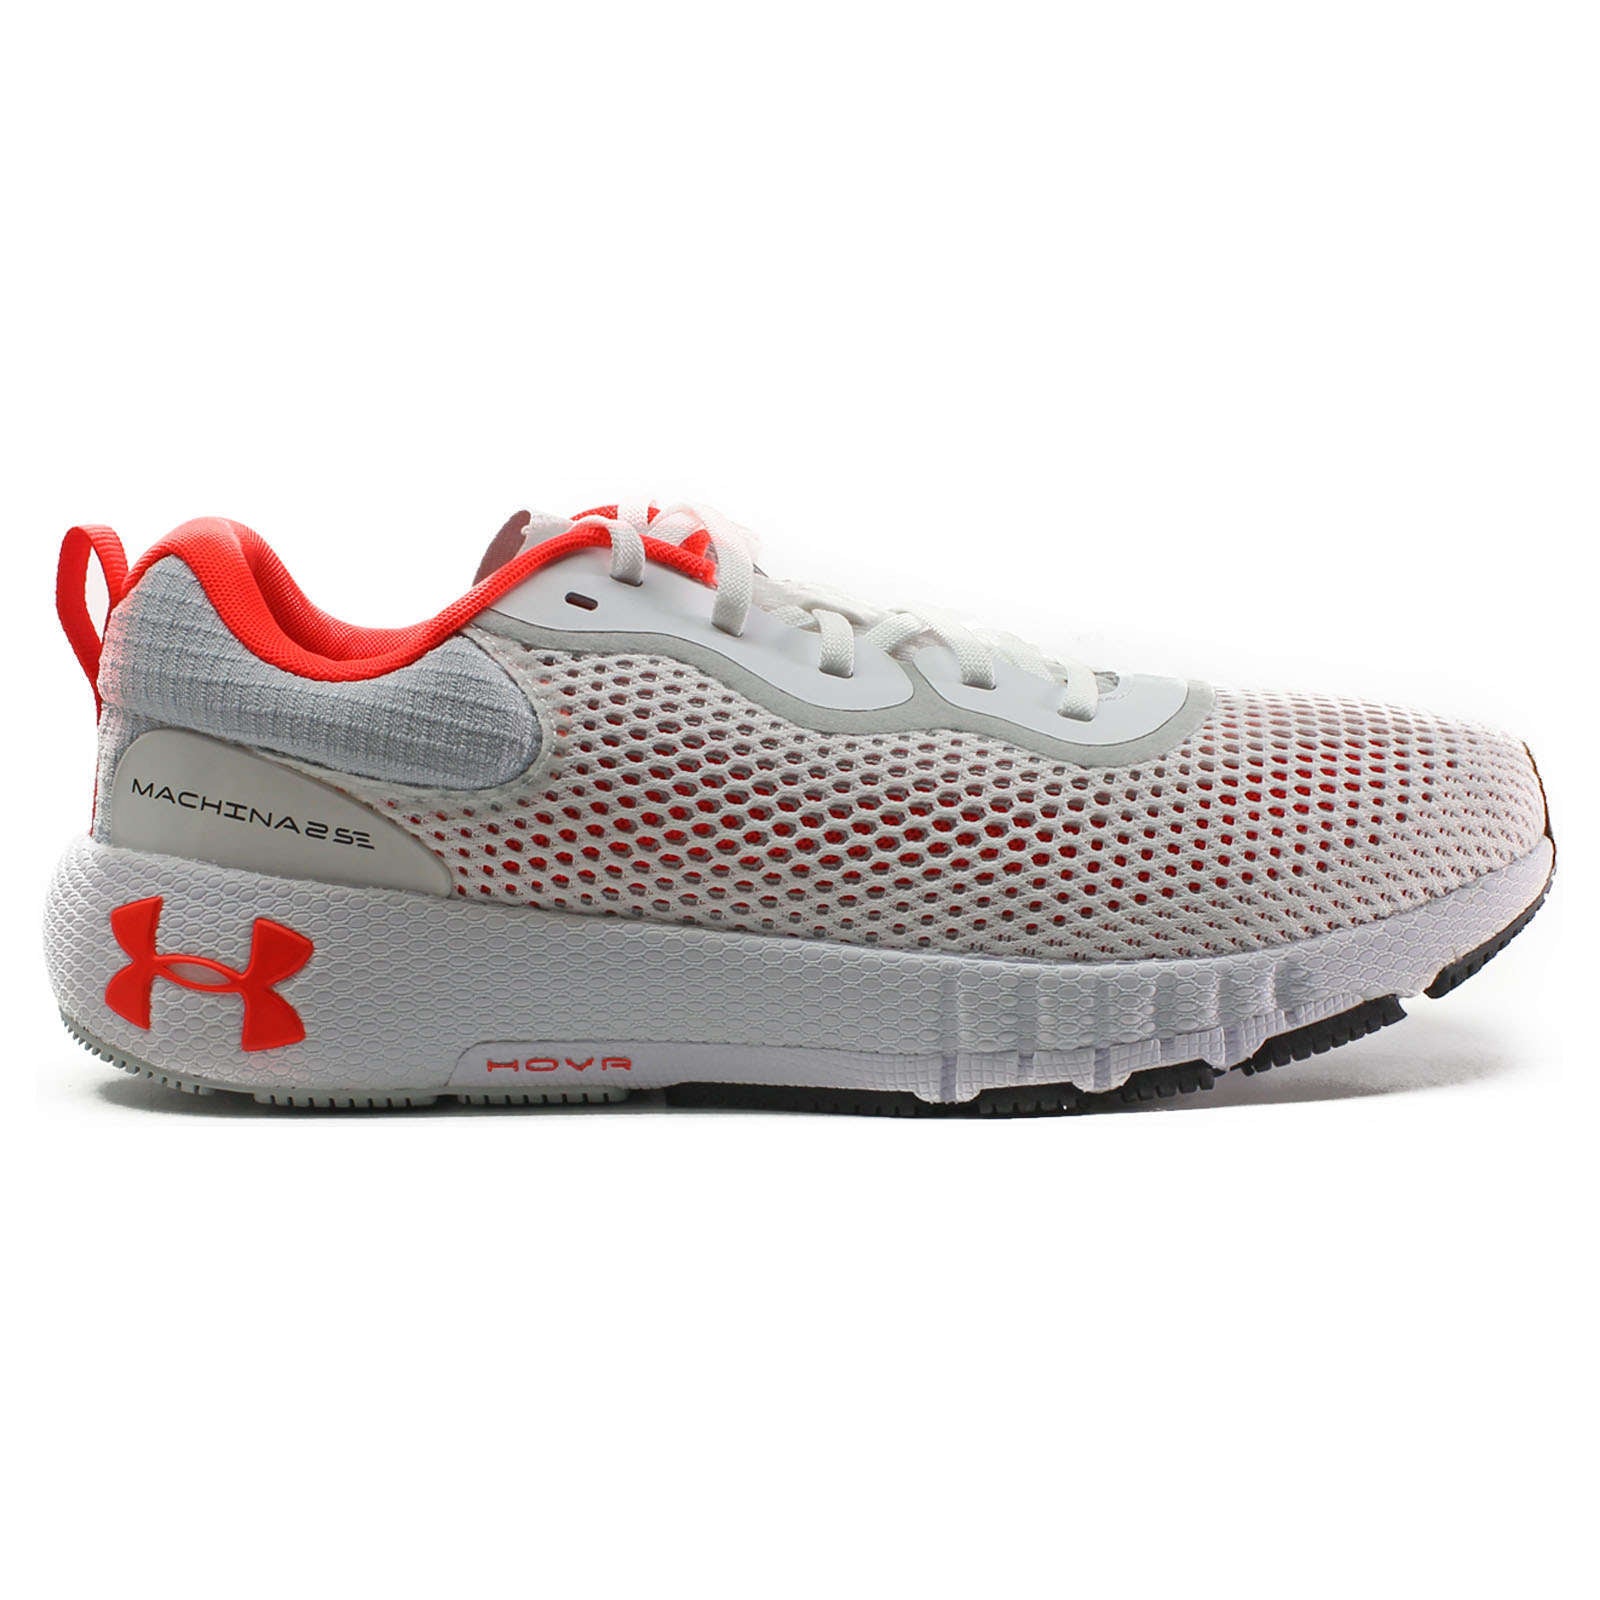 Under Armour HOVR Machina 2 Se Synthetic Textile Men's Low-Top Trainers#color_white grey